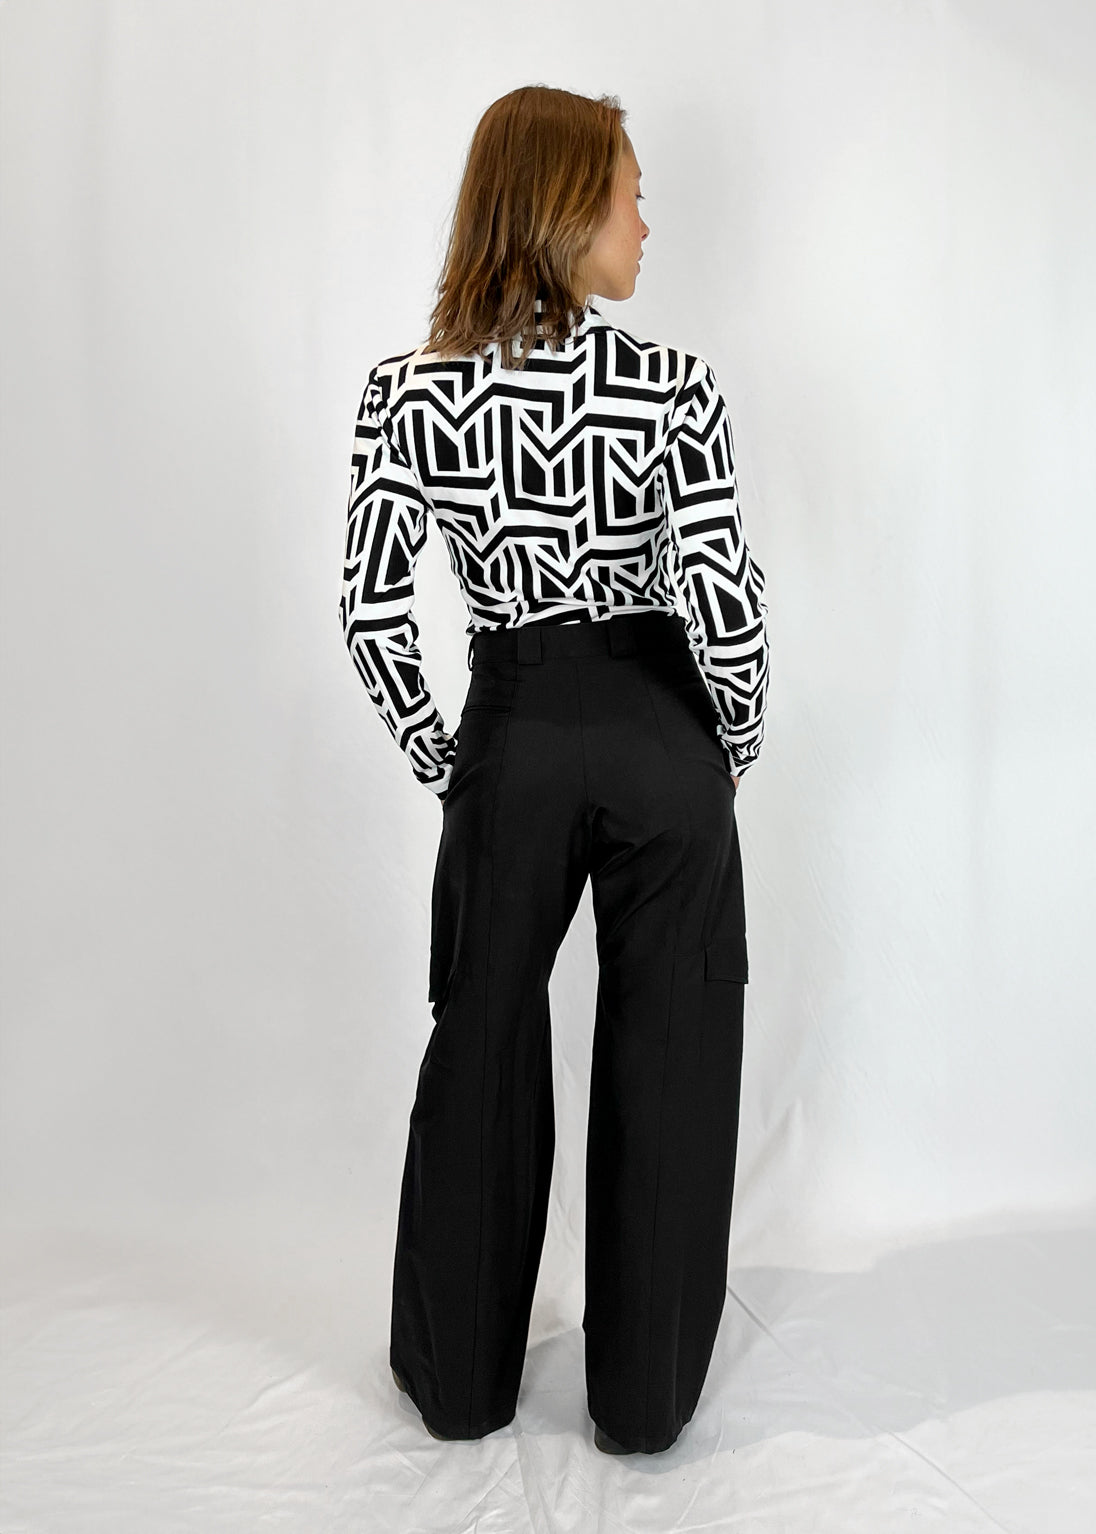 Long Sleeve Top in Black and White Geometric Pattern Jersey "Vicky”